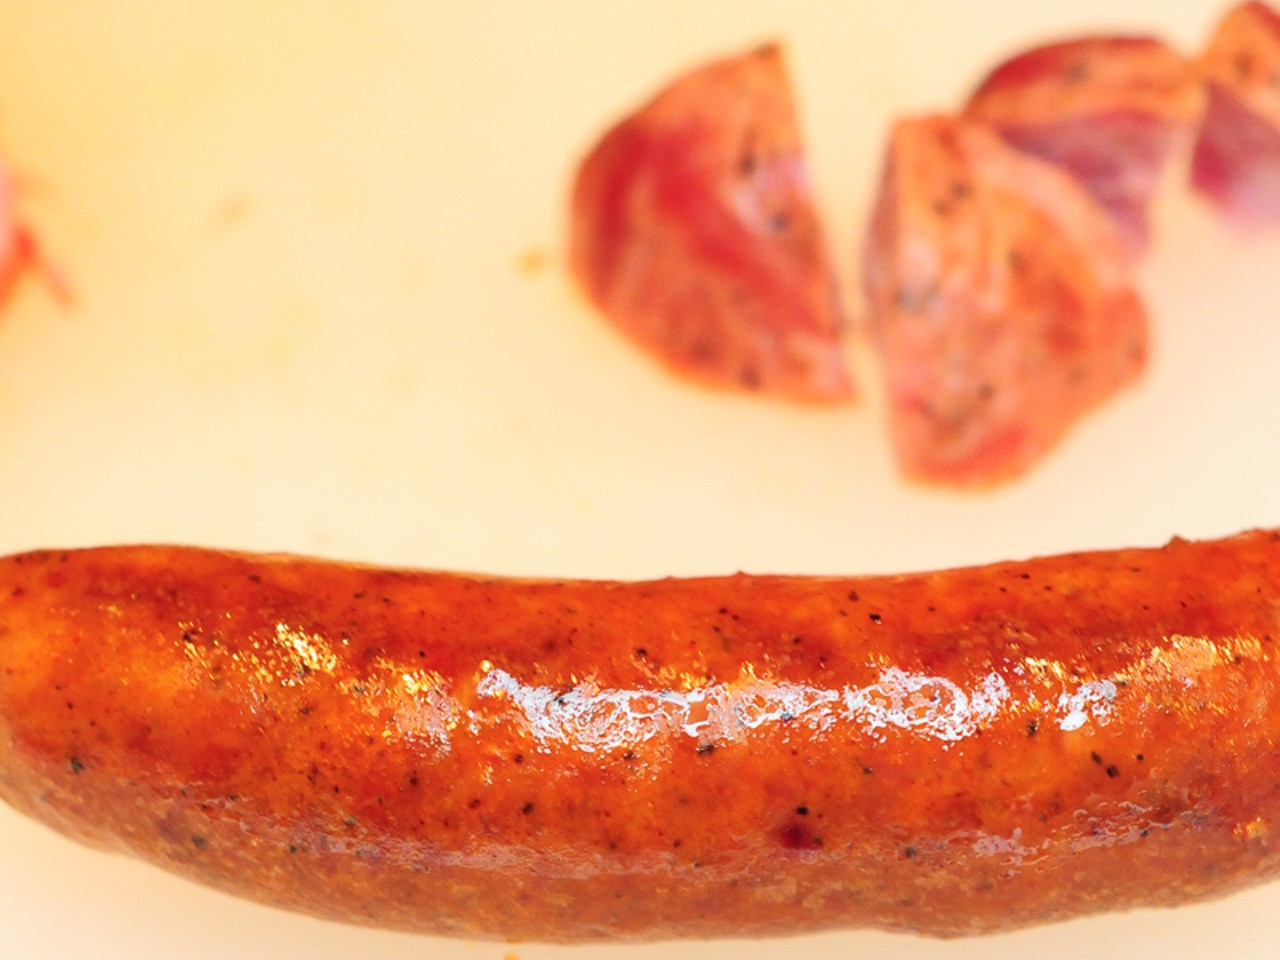 Andouille sausage from G & W Meat & Bavarian Style Sausage Co. Inc. in South St. Louis.